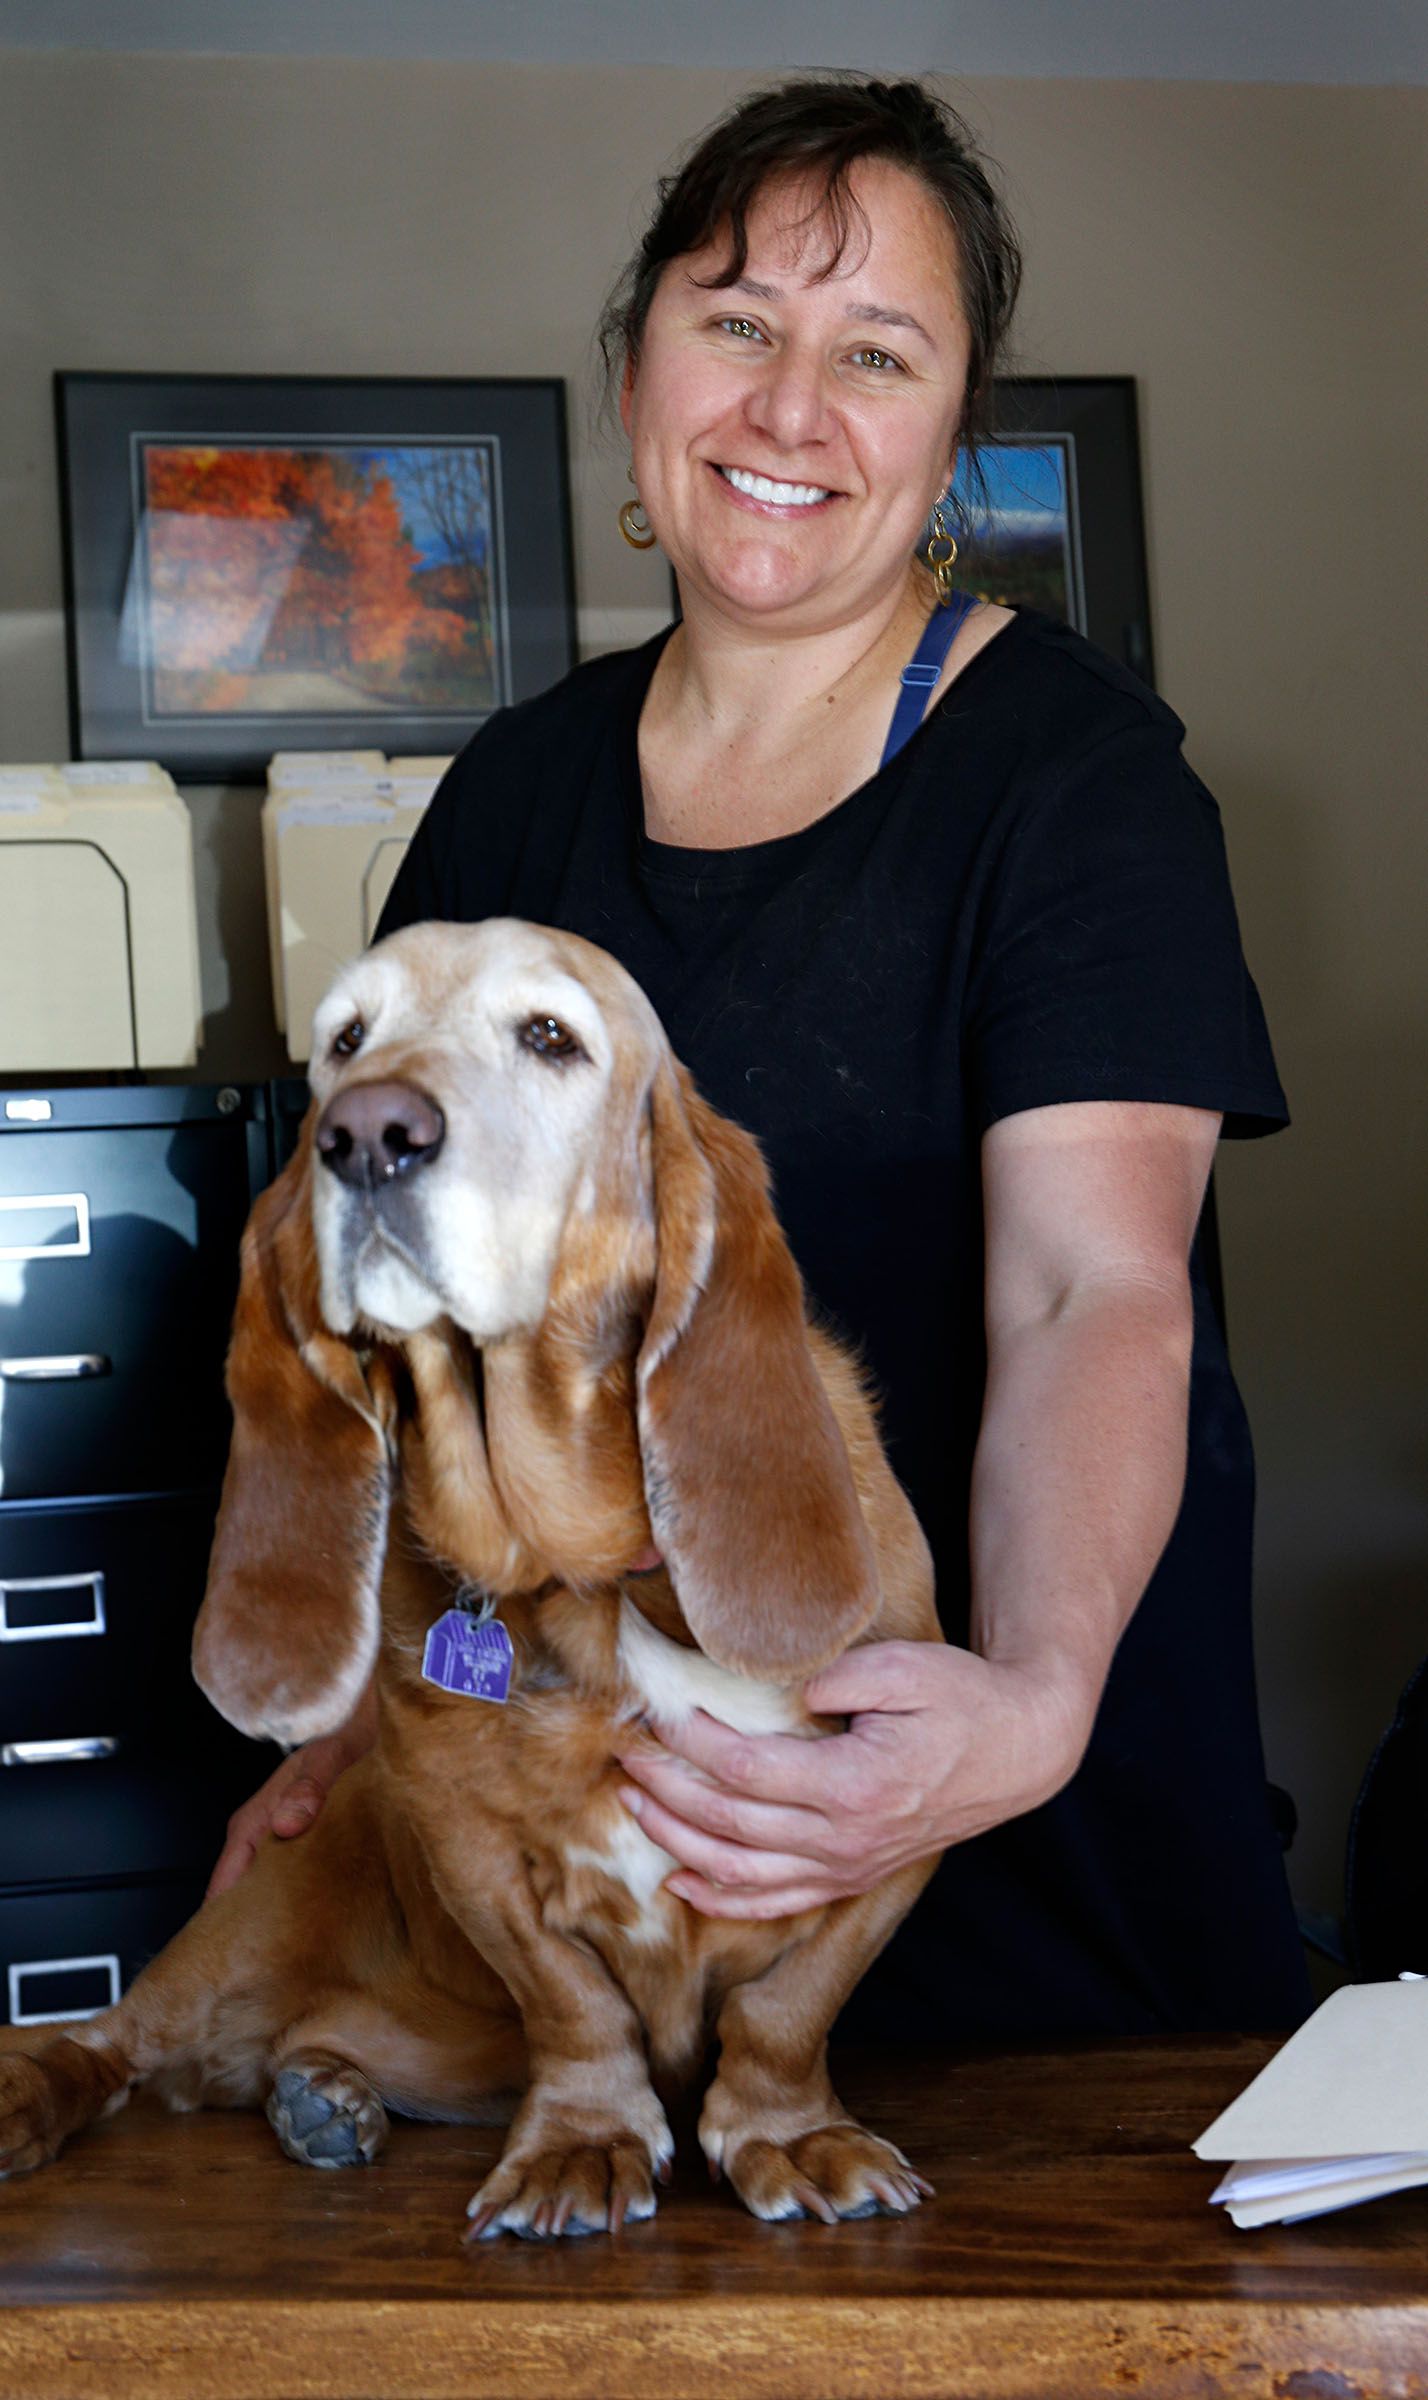 Photographed on July 18, 2018, Melissa Allen is owner of Gray Ledges Rentals and Property Management in Grantham, N.H. Allen started the business in 2011 and is usually accompanied by her office dog, Penelope. (Valley News - Geoff Hansen) Copyright Valley News. May not be reprinted or used online without permission. Send requests to permission@vnews.com.